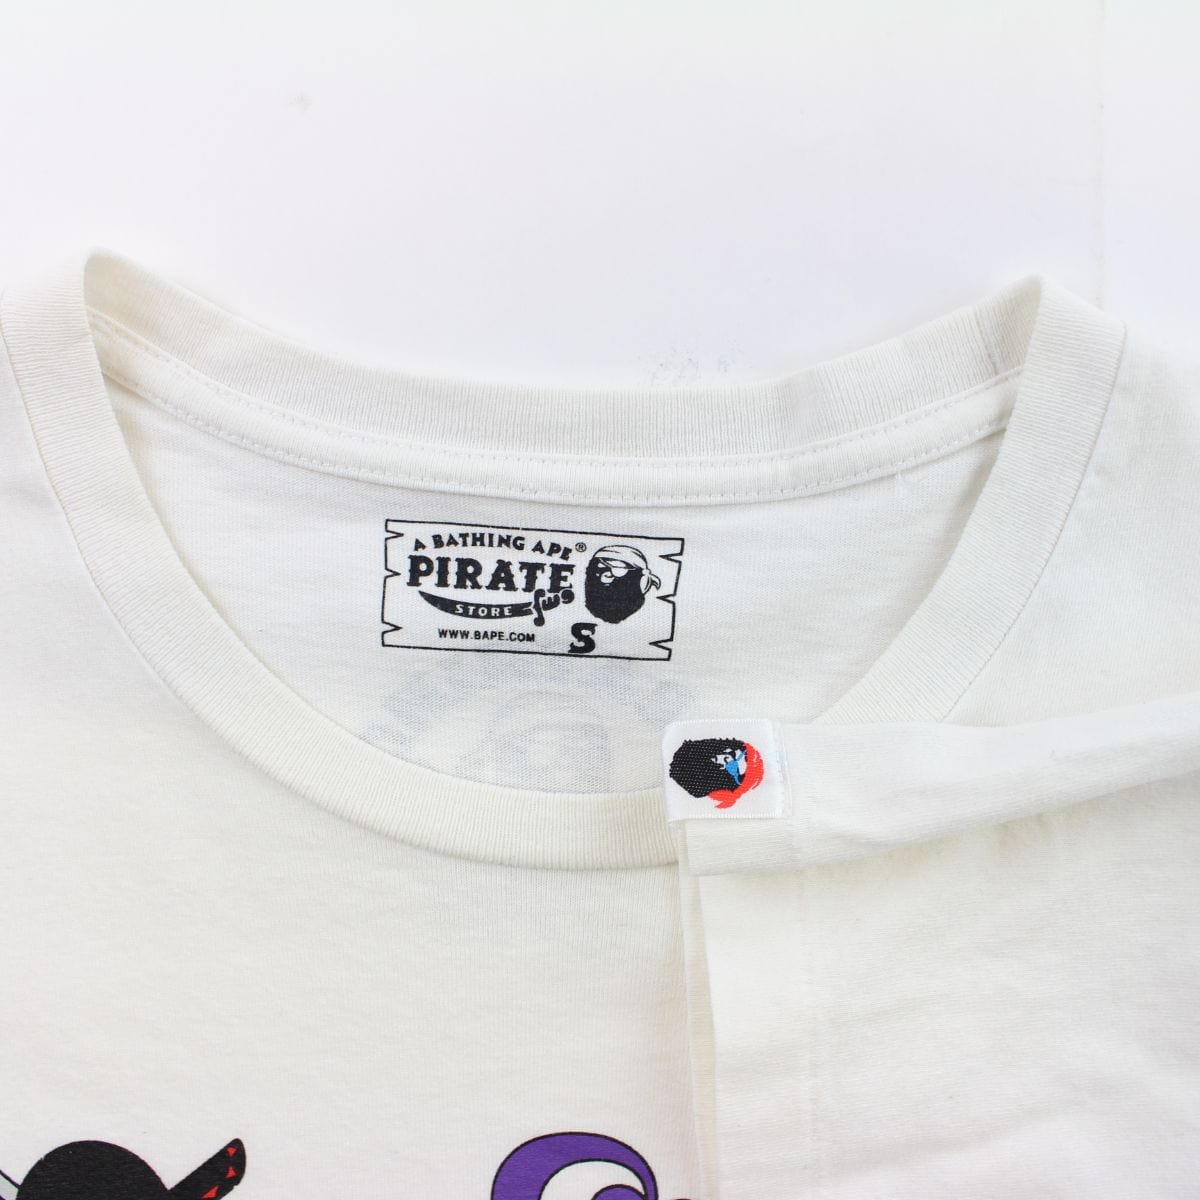 Bape x One Piece Flags Logos Tee White - SaruGeneral